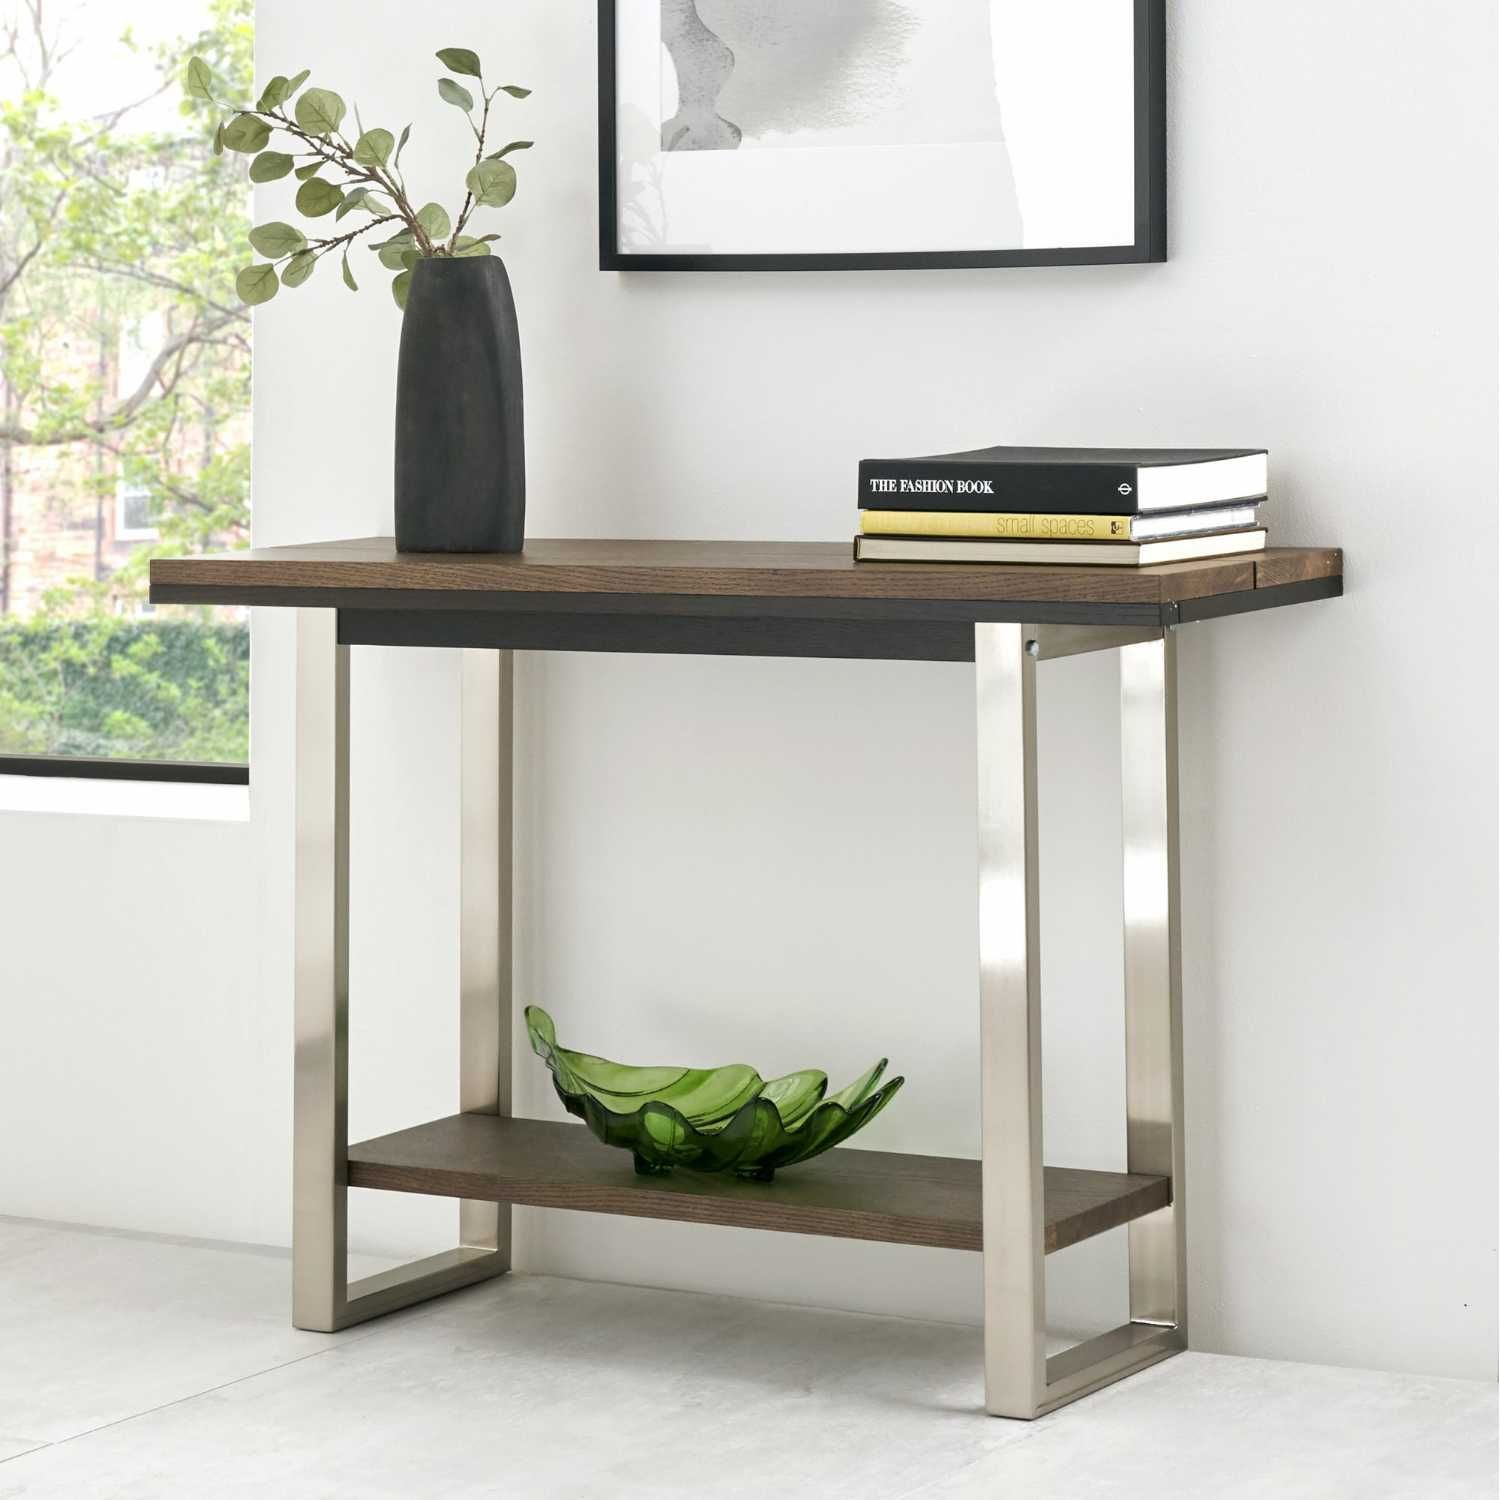 Tivoli Dark Oiled Oak Brushed Nickel Metal Framed Console Inside Metal And Mission Oak Console Tables (View 13 of 20)